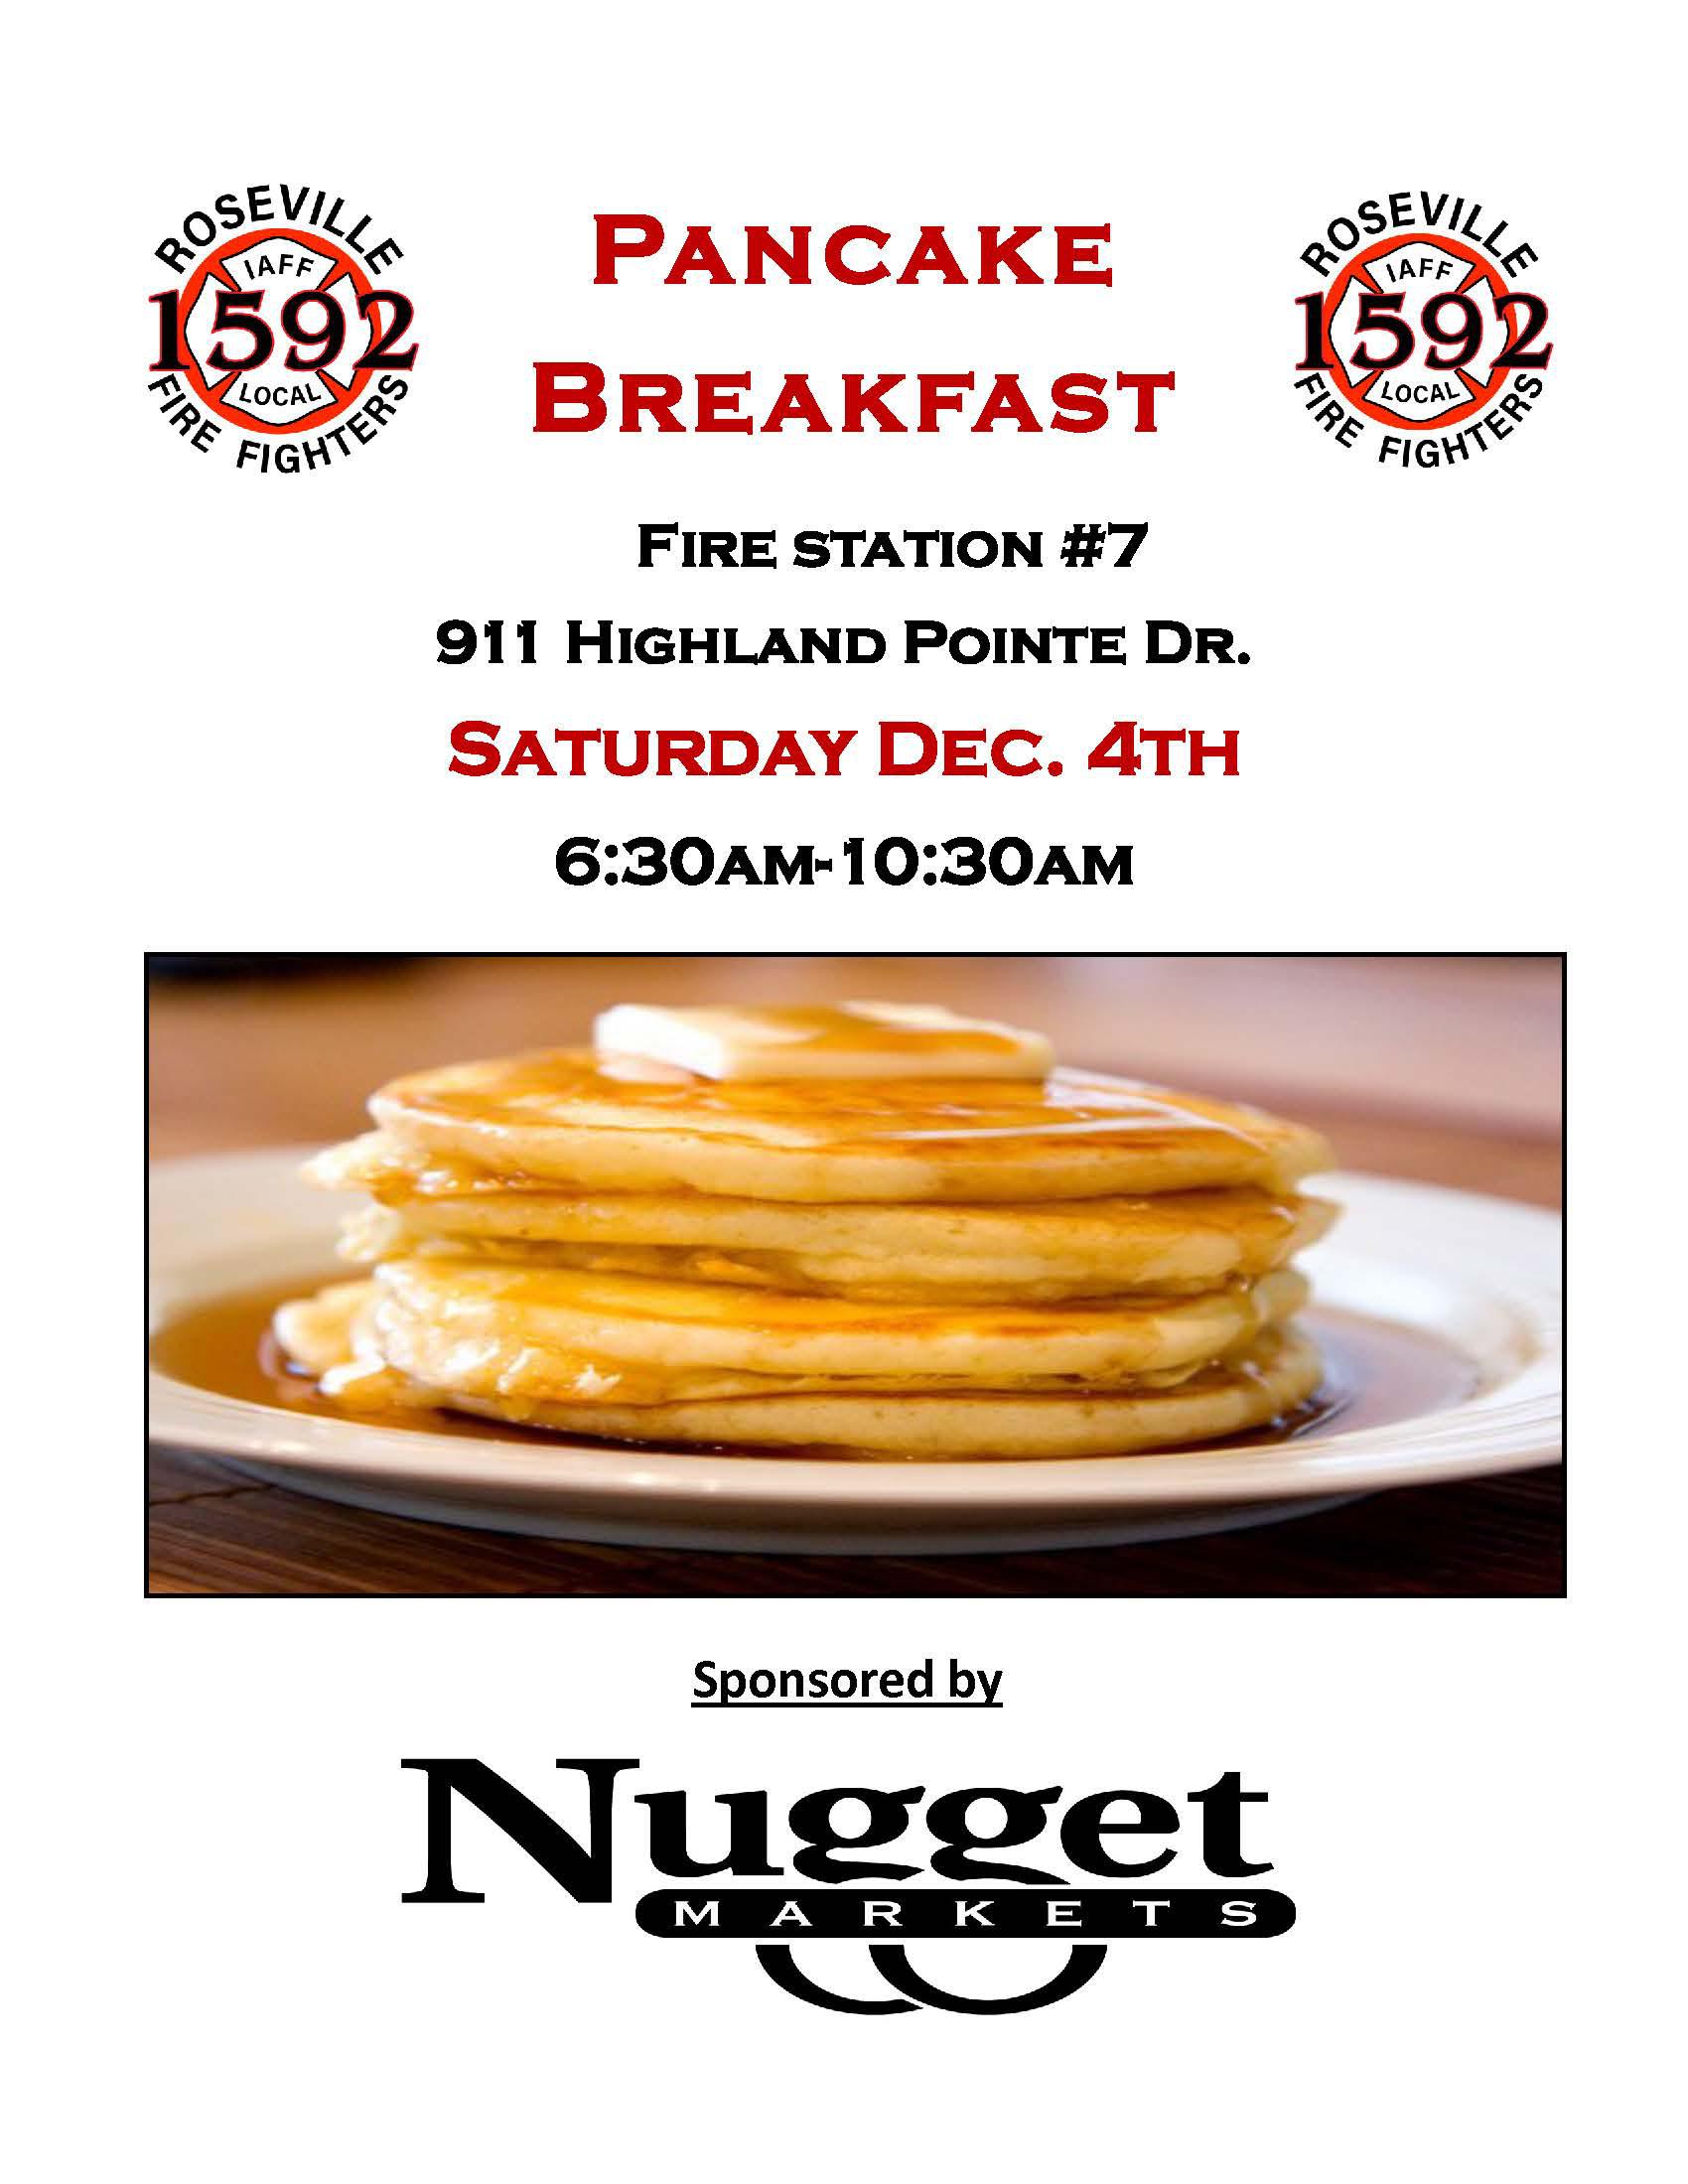 More information about "Roseville Firefighters's Pancake Breakfast"